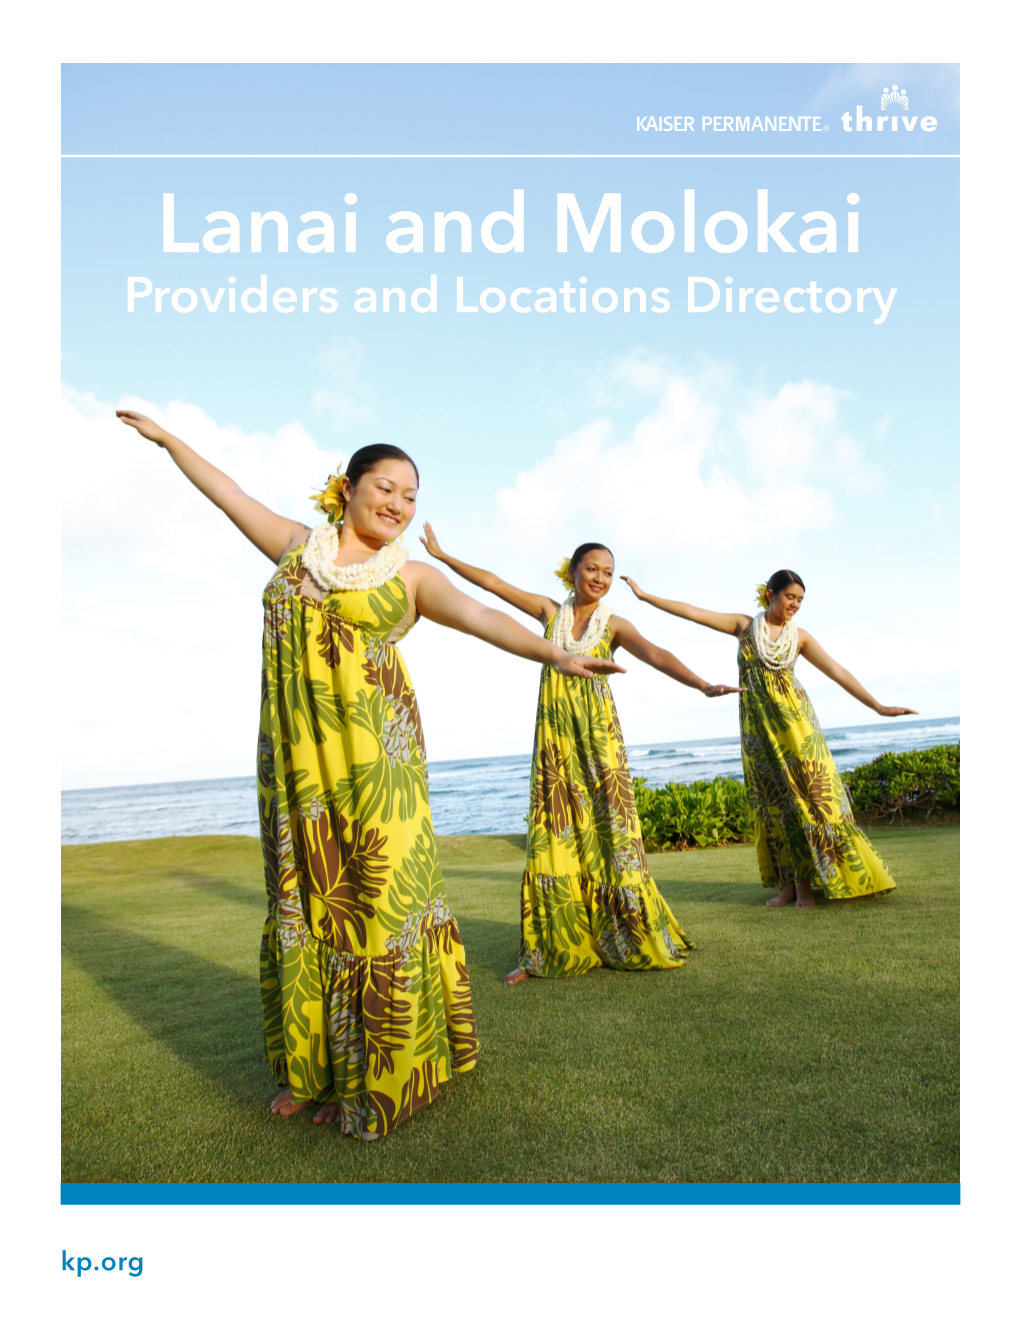 Kaiser Permanente Lanai and Molokai Providers and Locations Directory